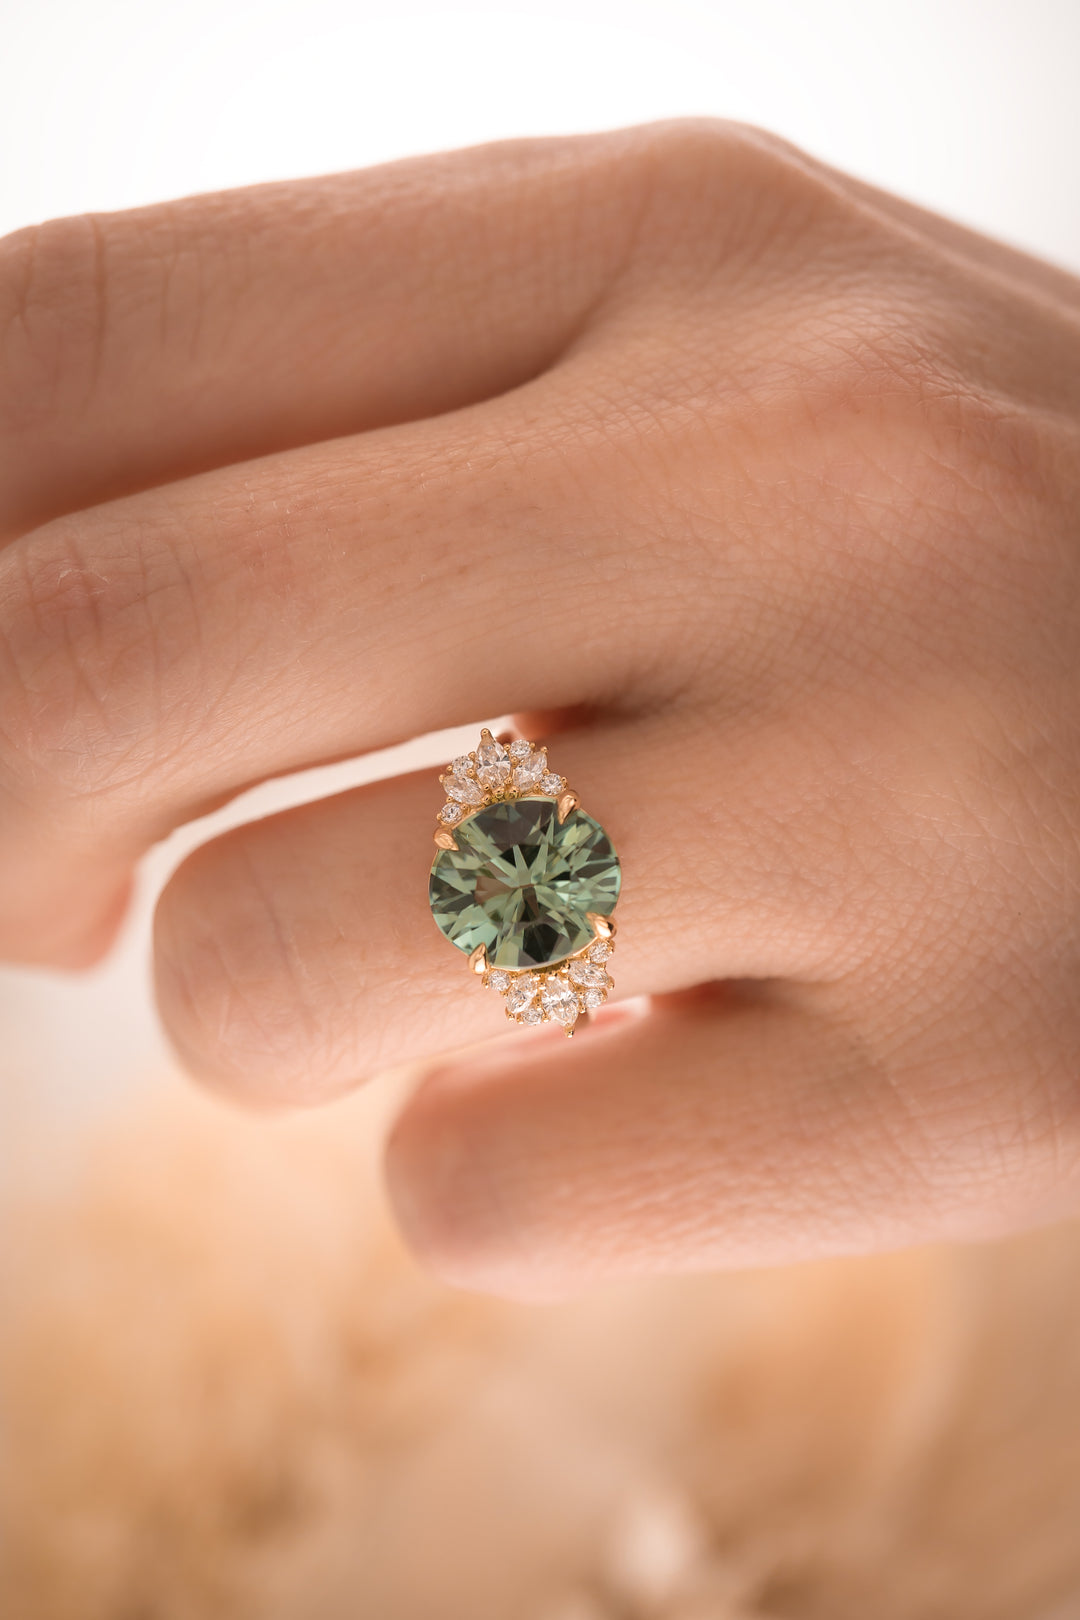 The Ambrosia 3.9 CT Teal Tourmaline Ring